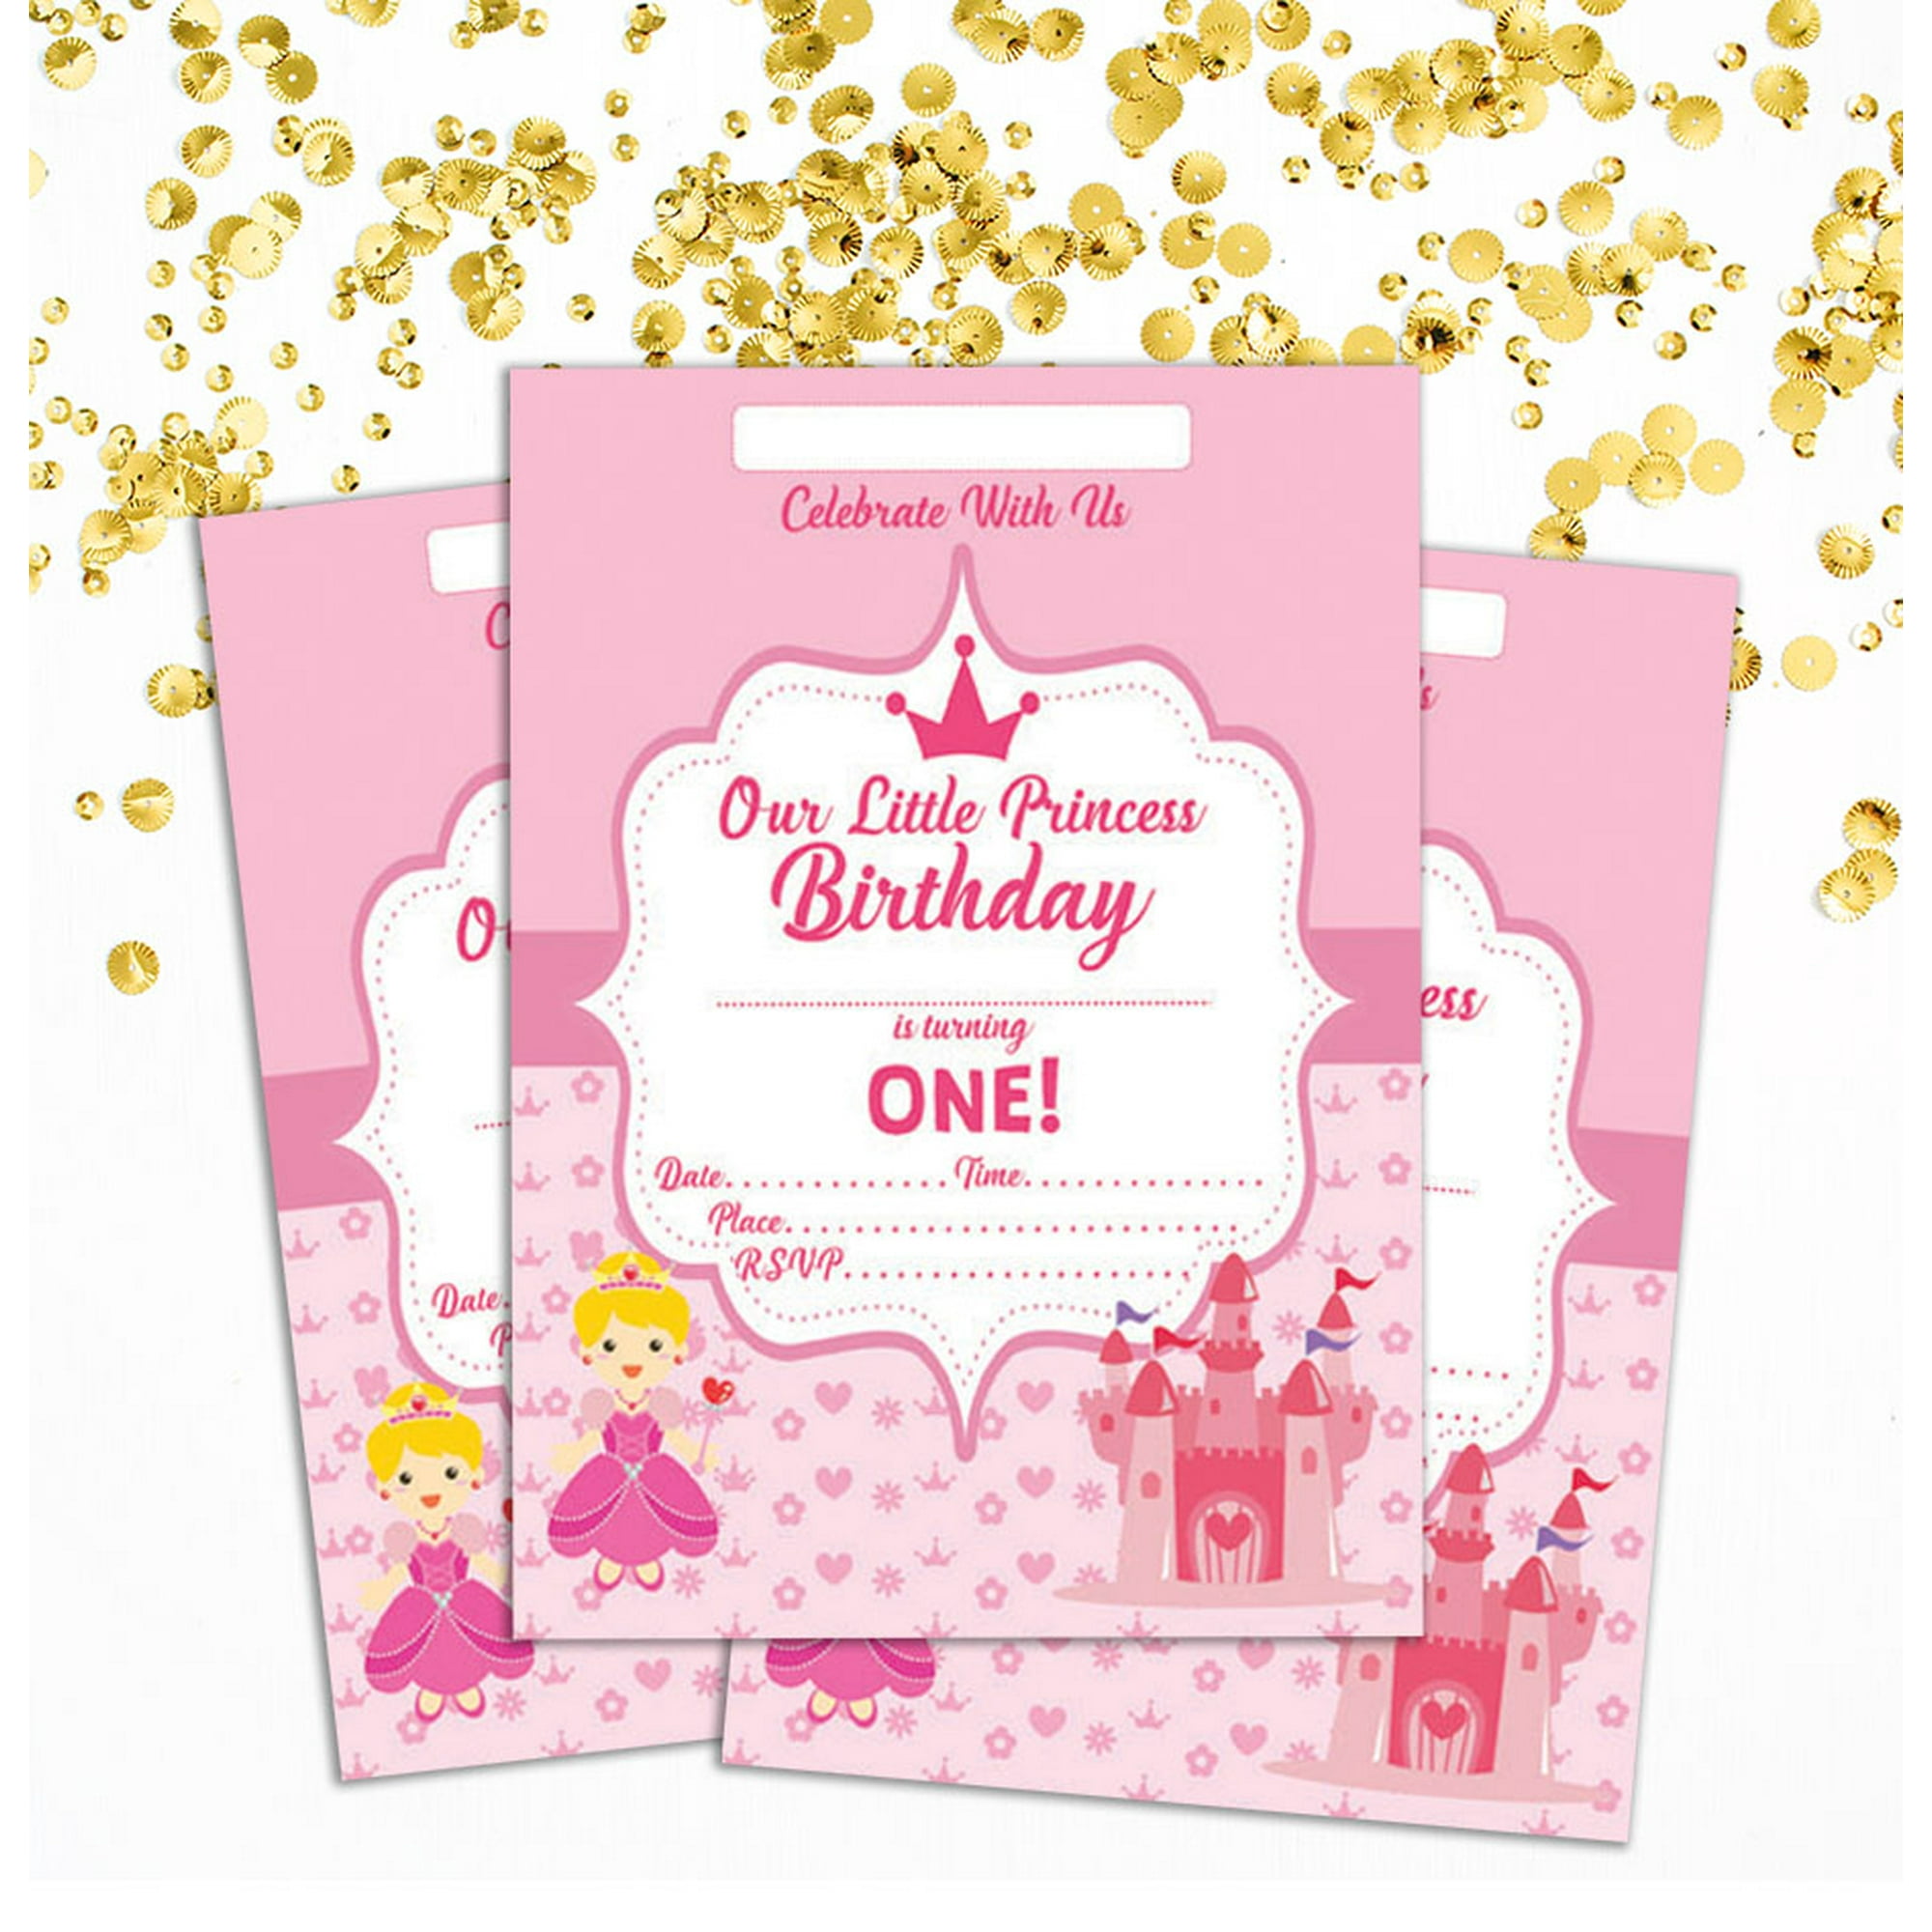 Darling Souvenir Pink Birthday Invitation Card Printable Elegant Fill or  Write In Blank Party Invites 28 Pcs 5 x 7 Inches